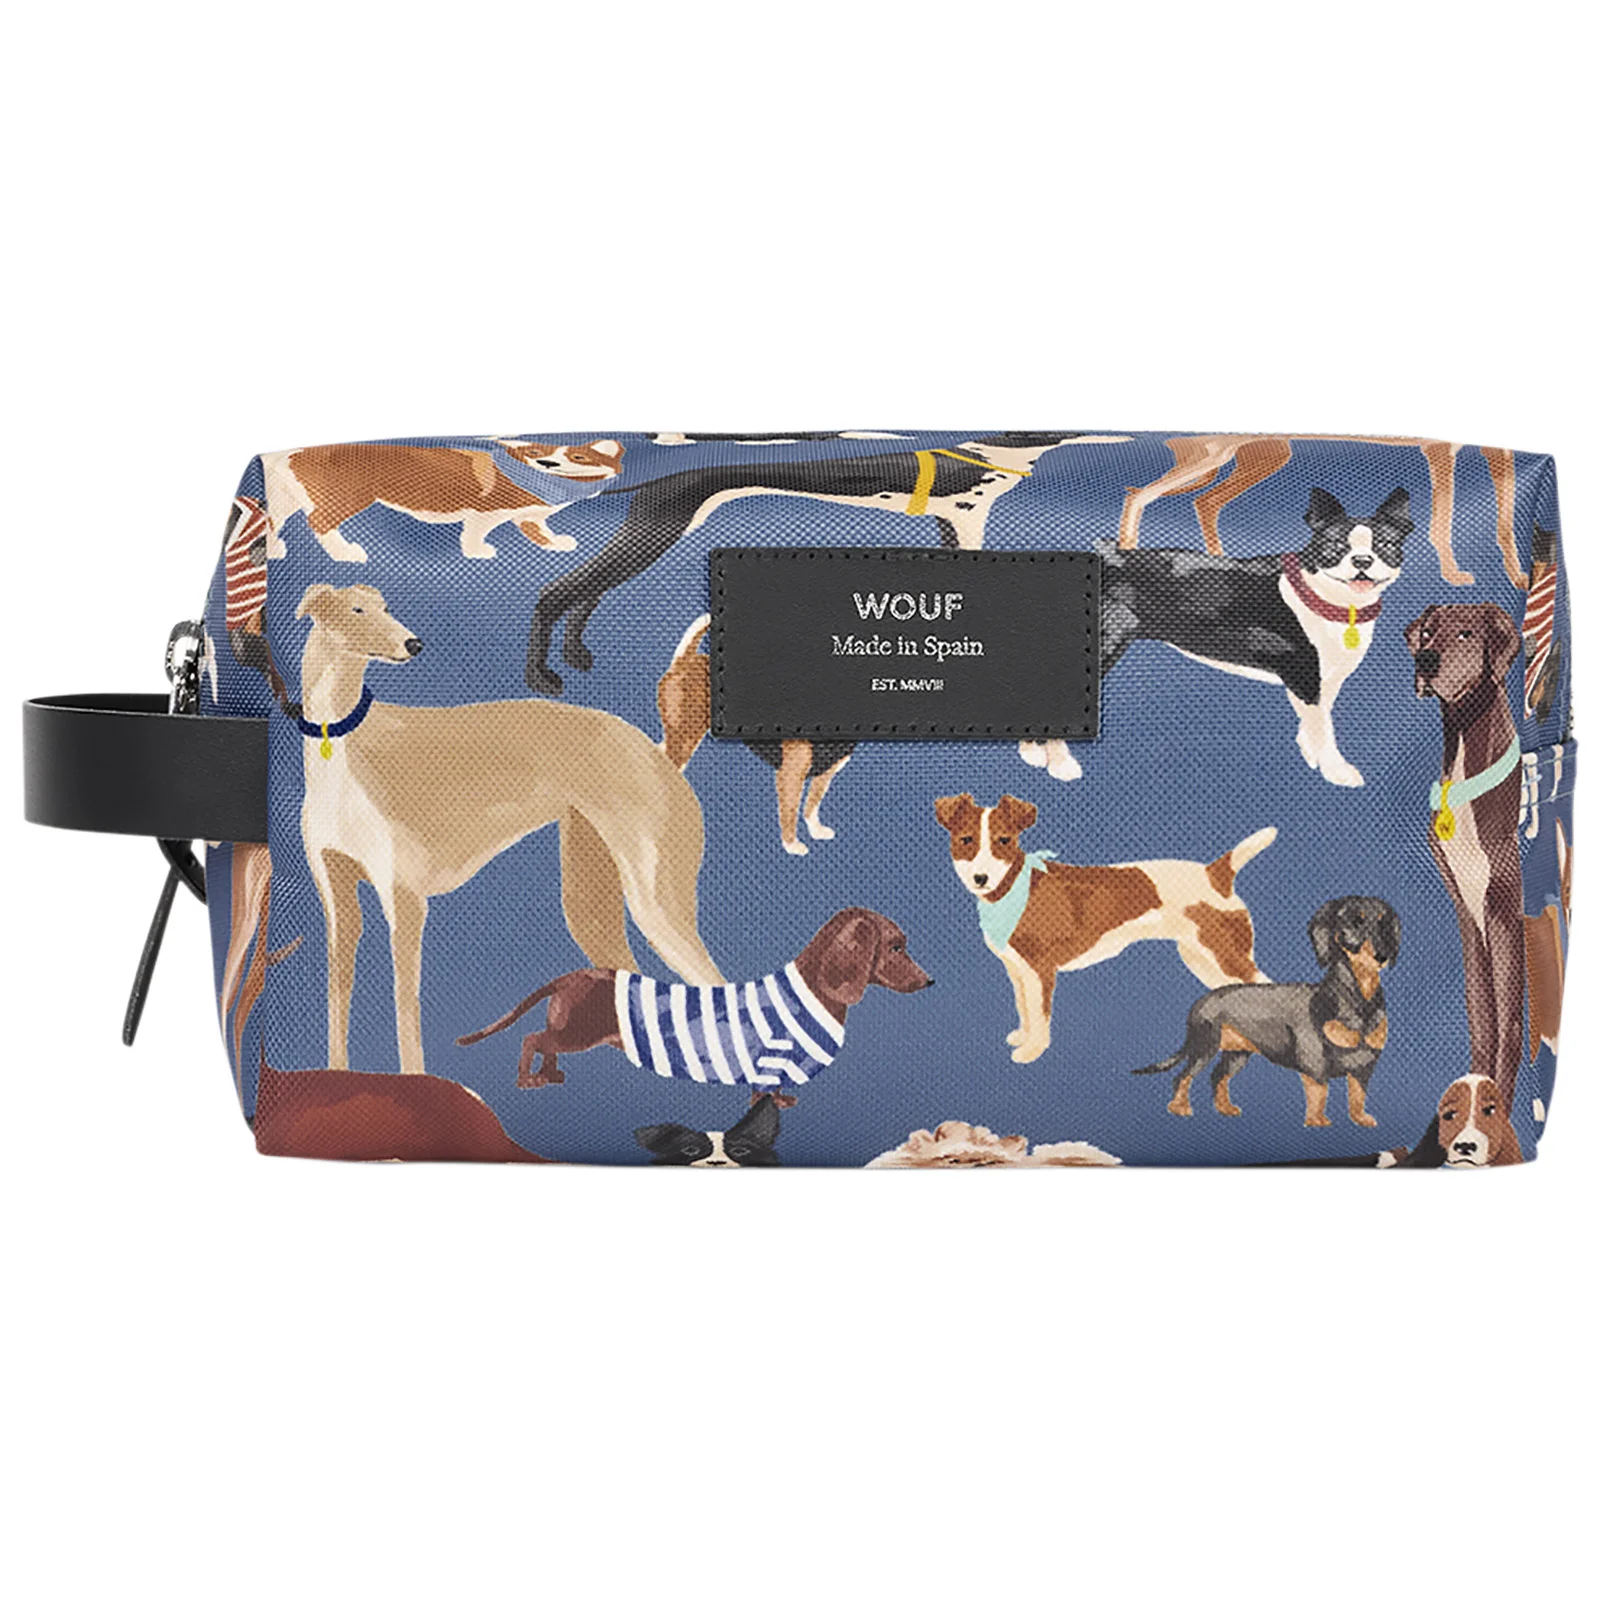 Wouf Travel Case - Woufers Image 1